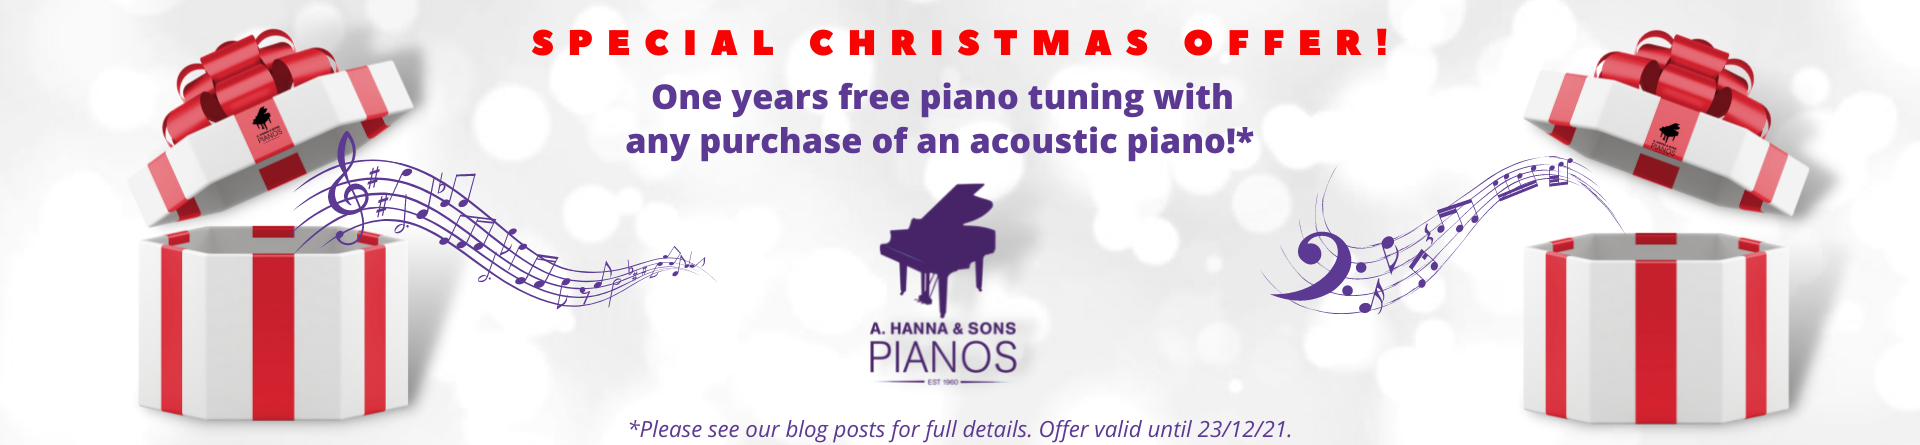 Christmas offer free acoustic piano tuning for 1 year